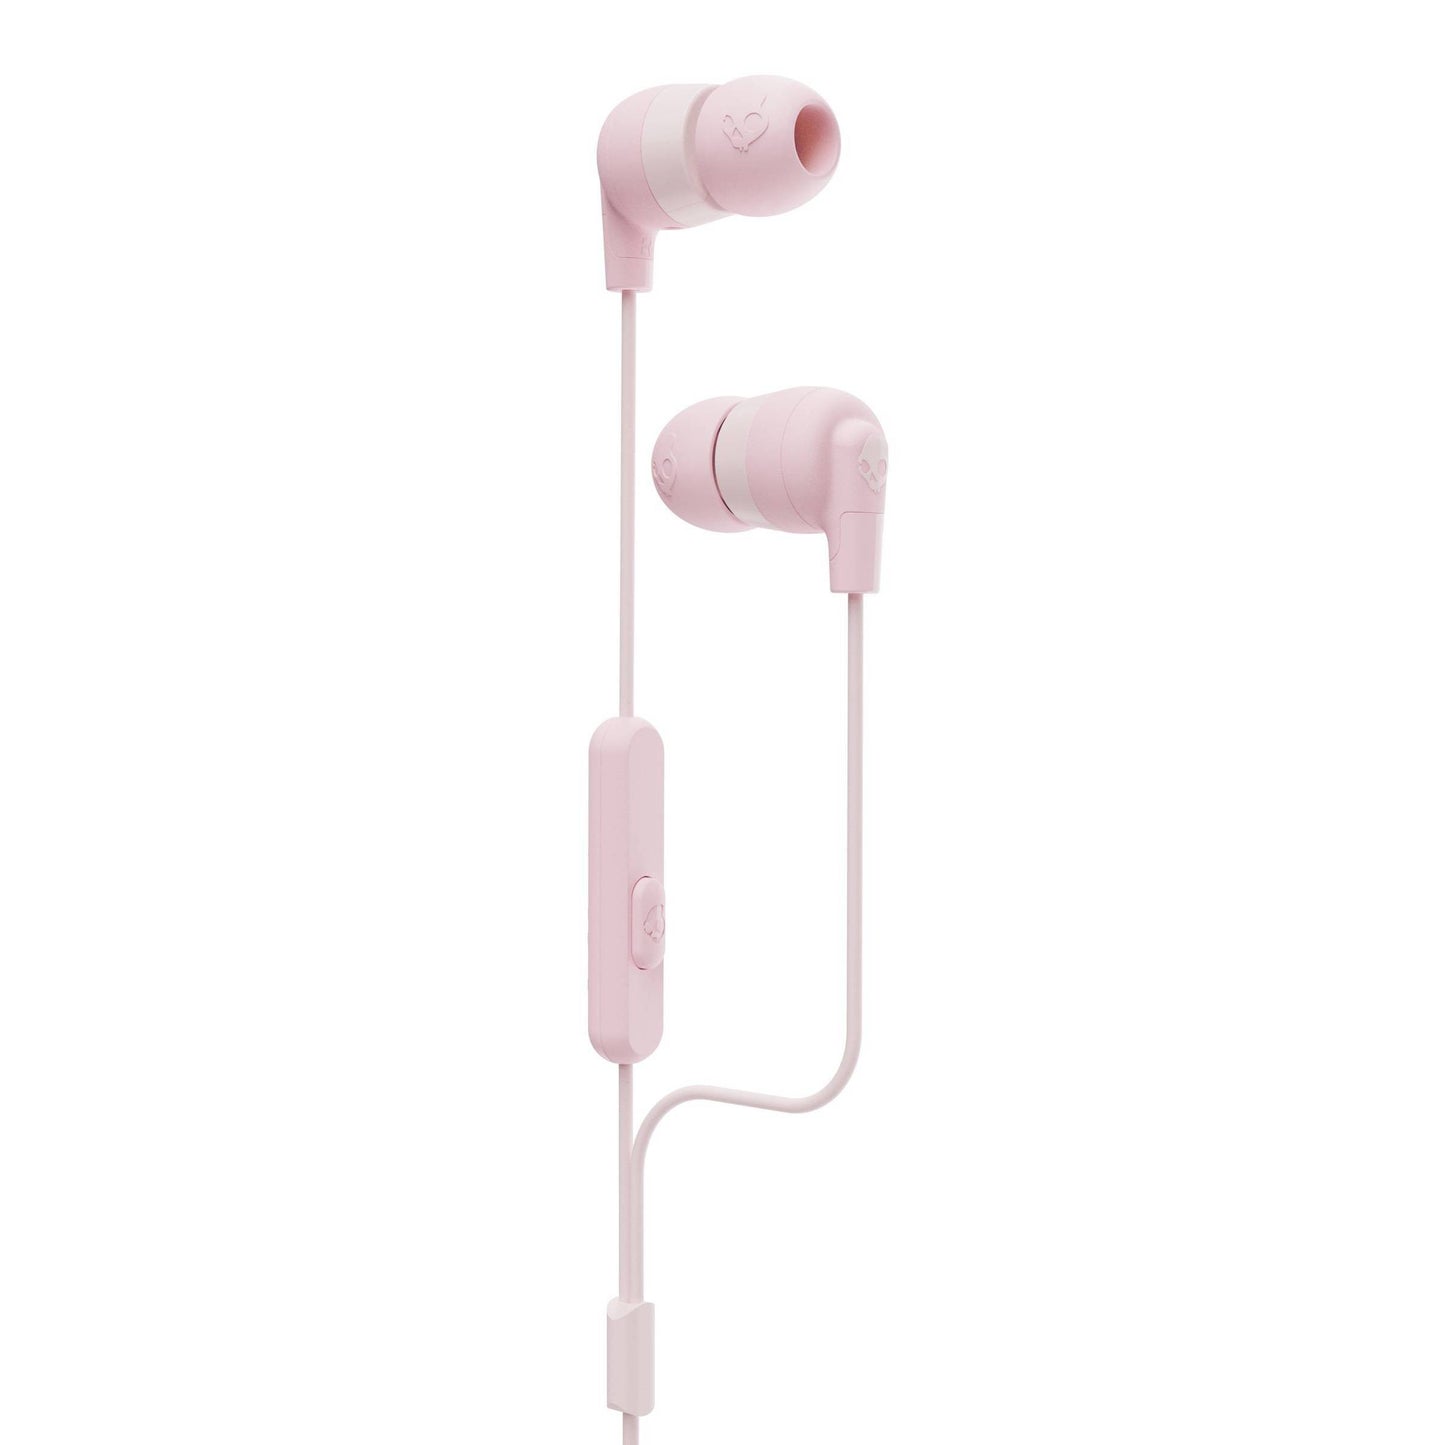 Lnk'd Noise Isolating Headphones From SKULL CANDY (Pink)